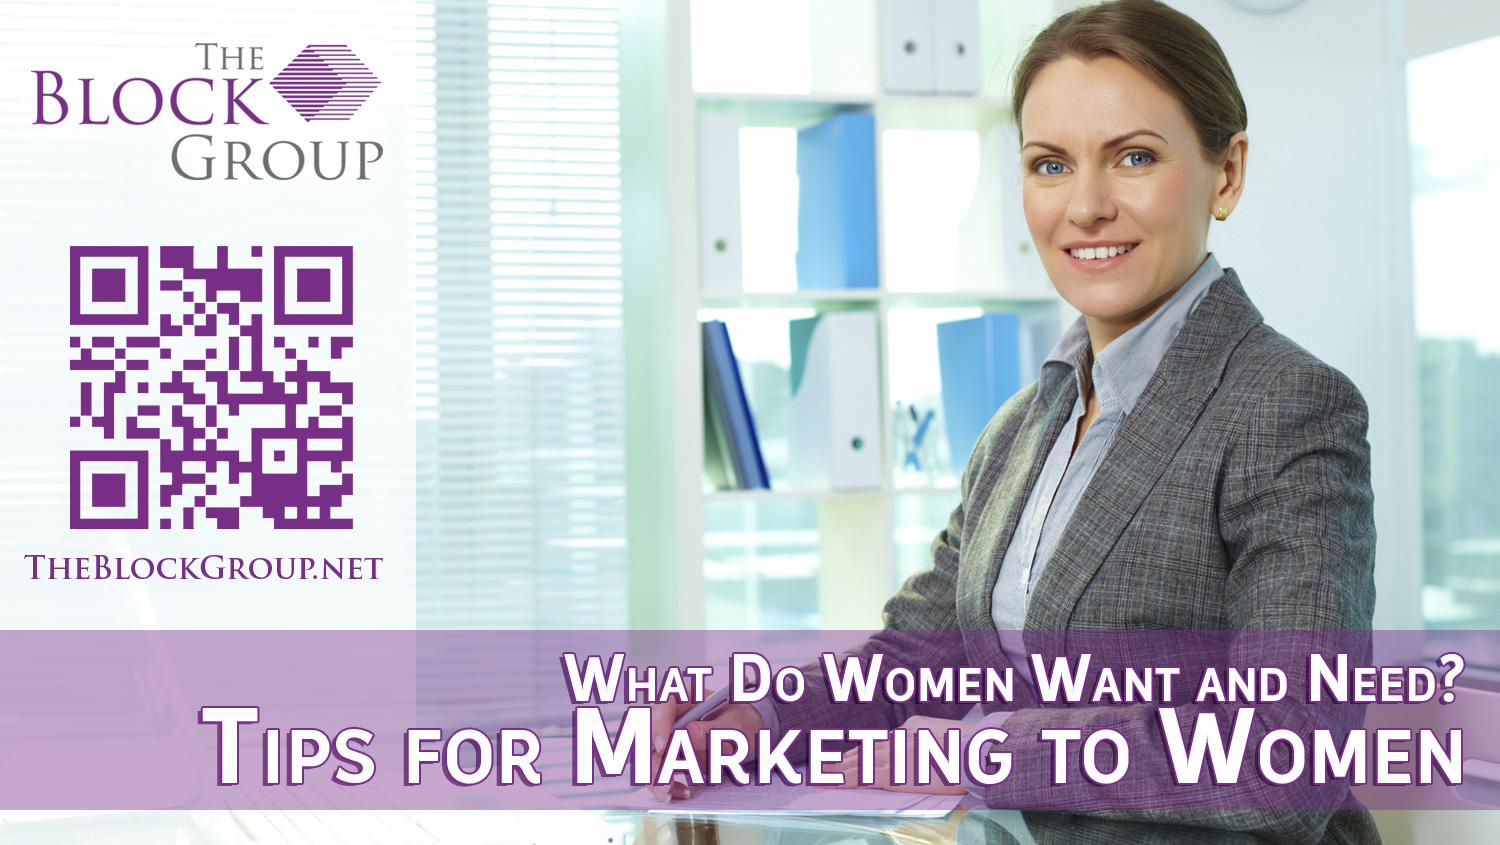 07-tips-for-marketing-to-women